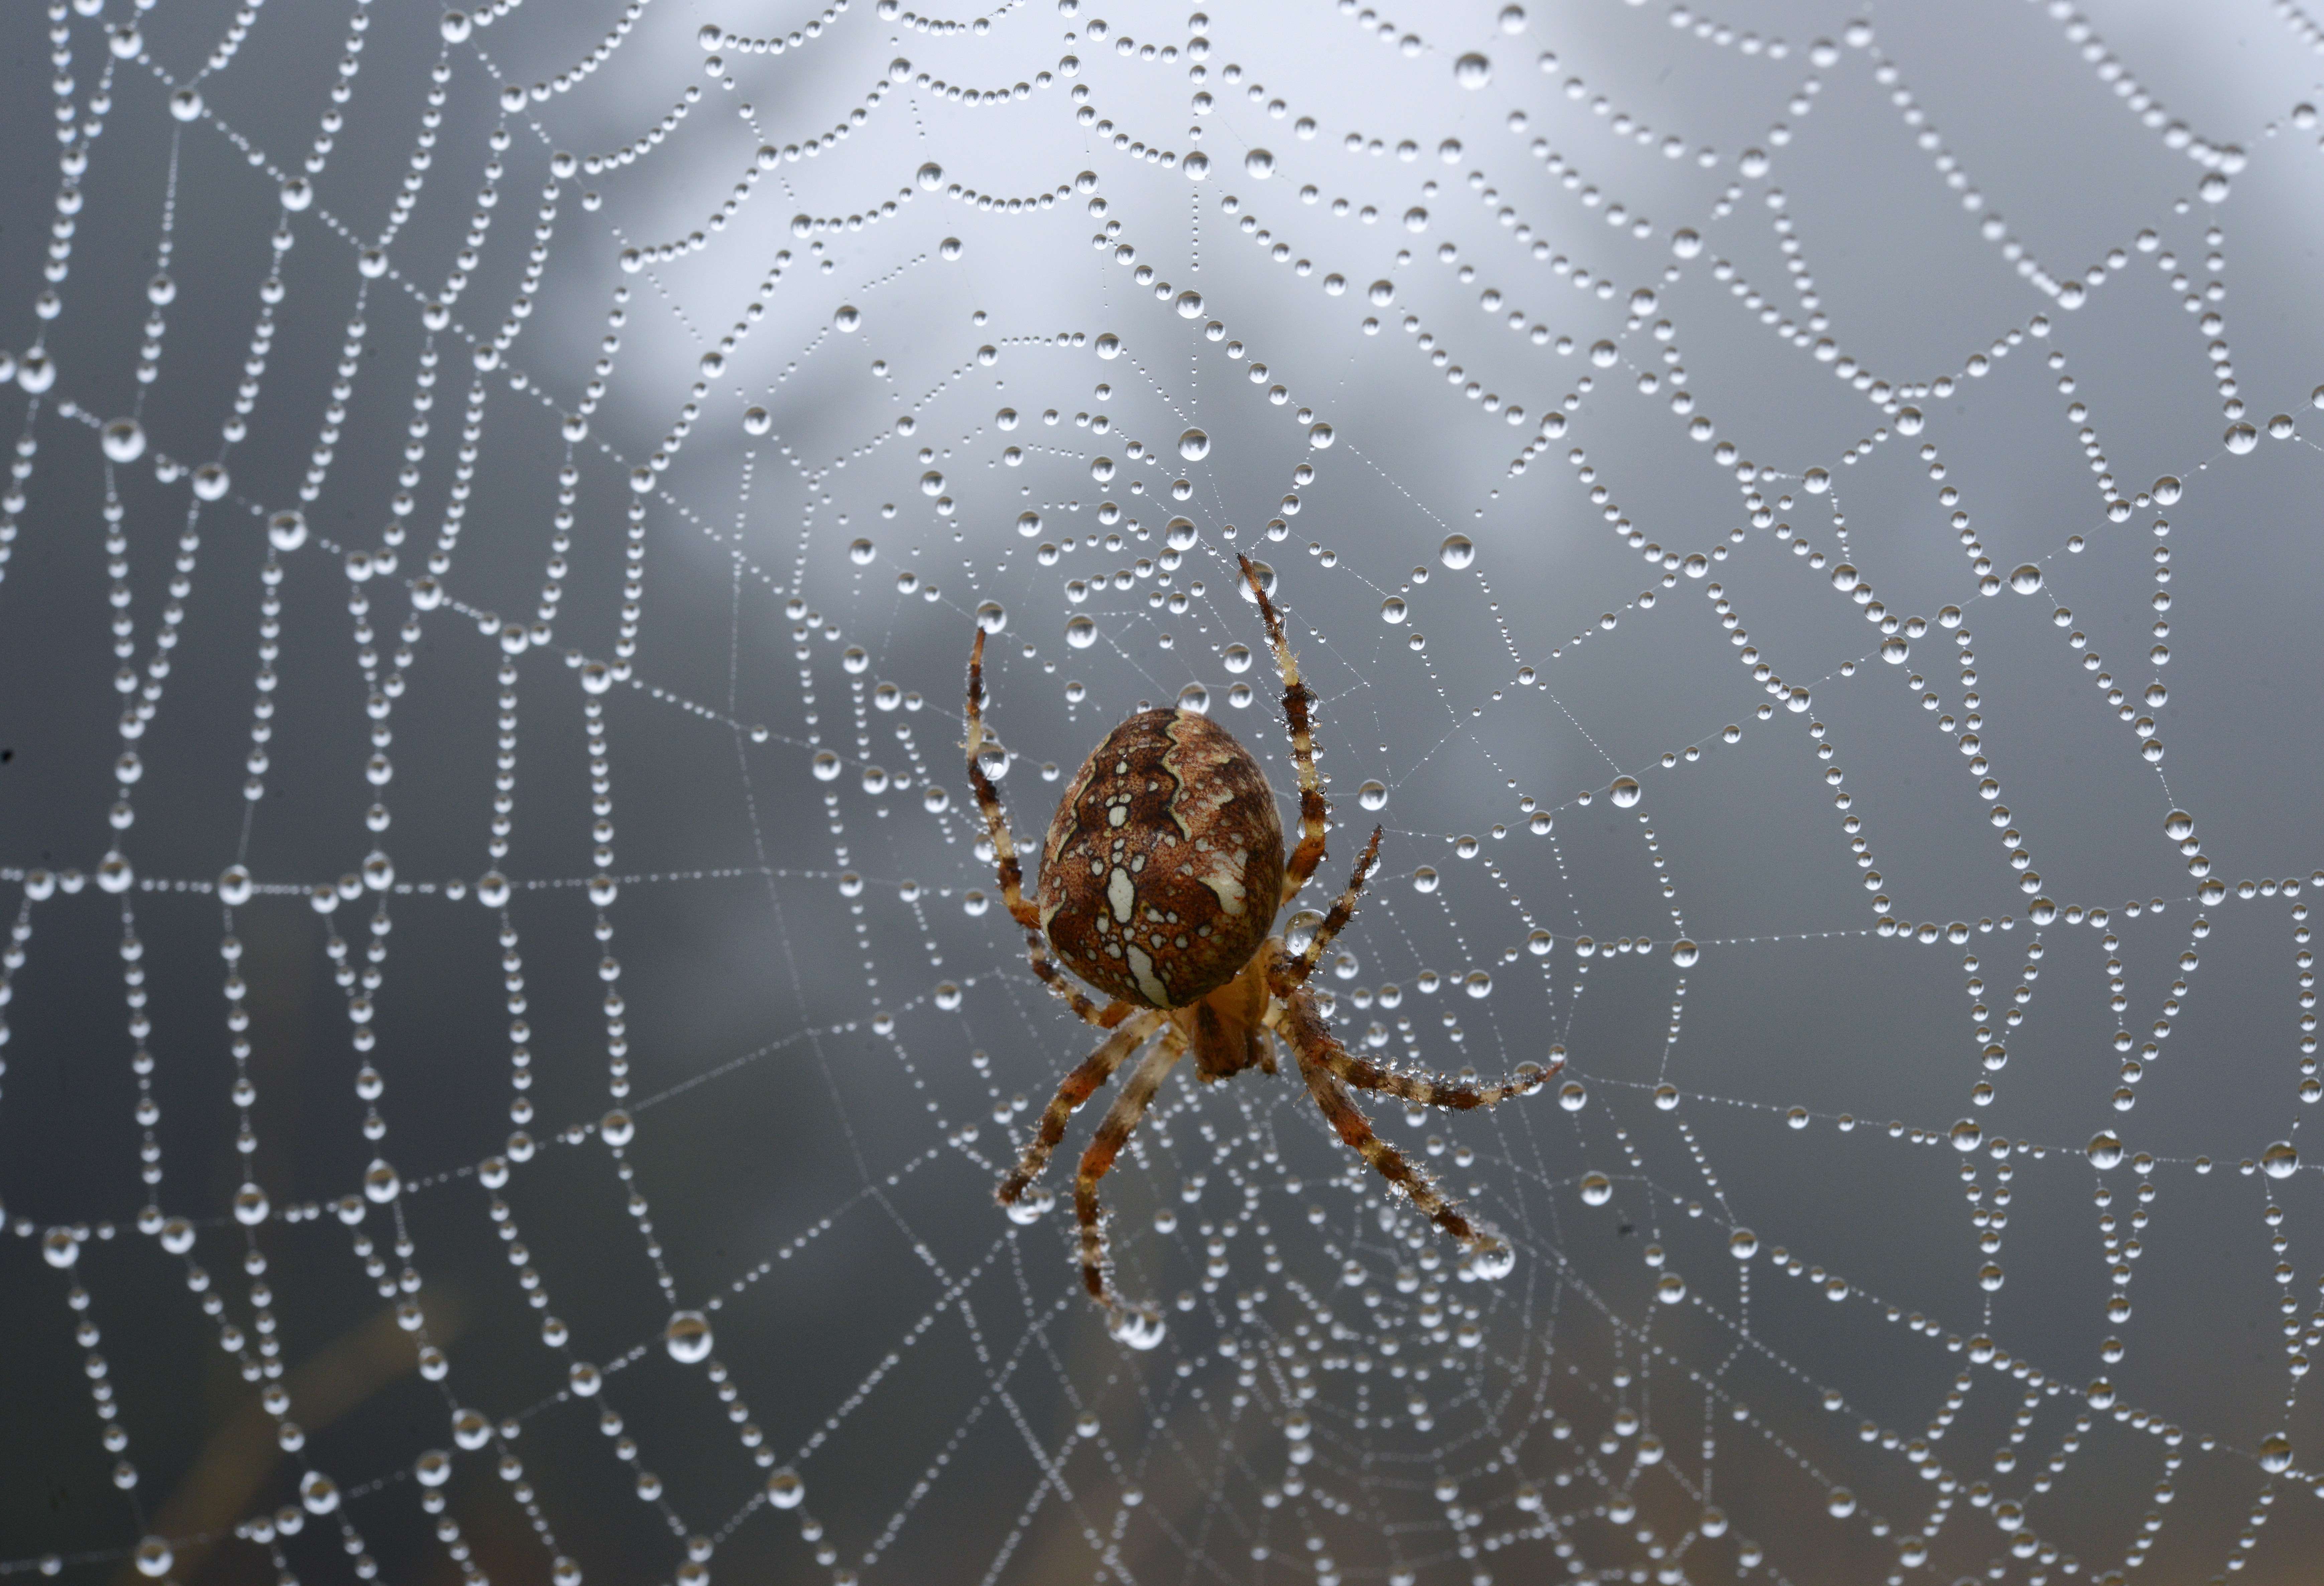 Why we fear spiders more than climate change